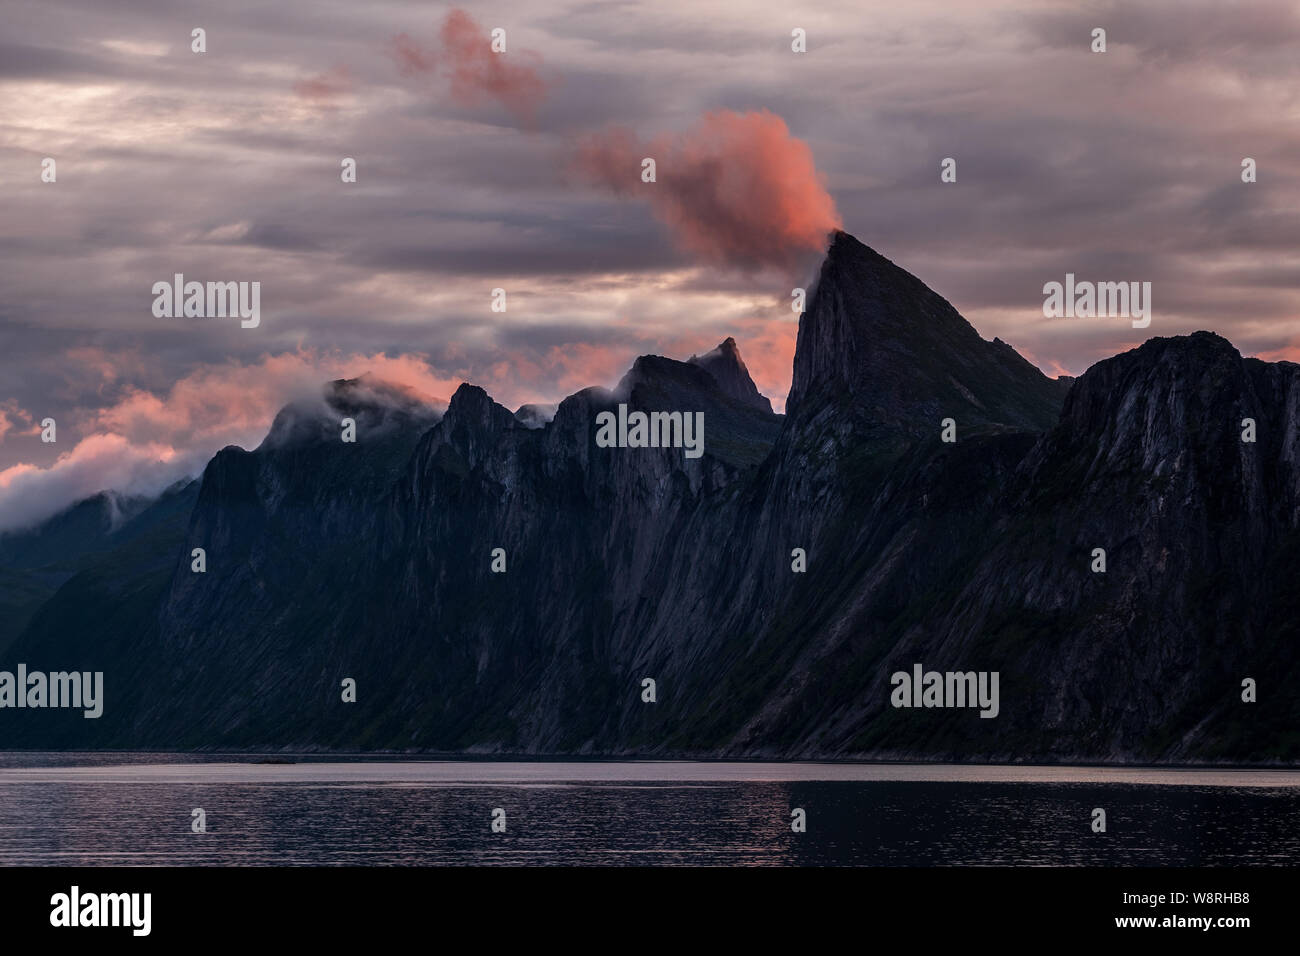 Impressive mountain range of Segla over a fjord at midnight under cloudy colorful sky, Senja, Norway Stock Photo